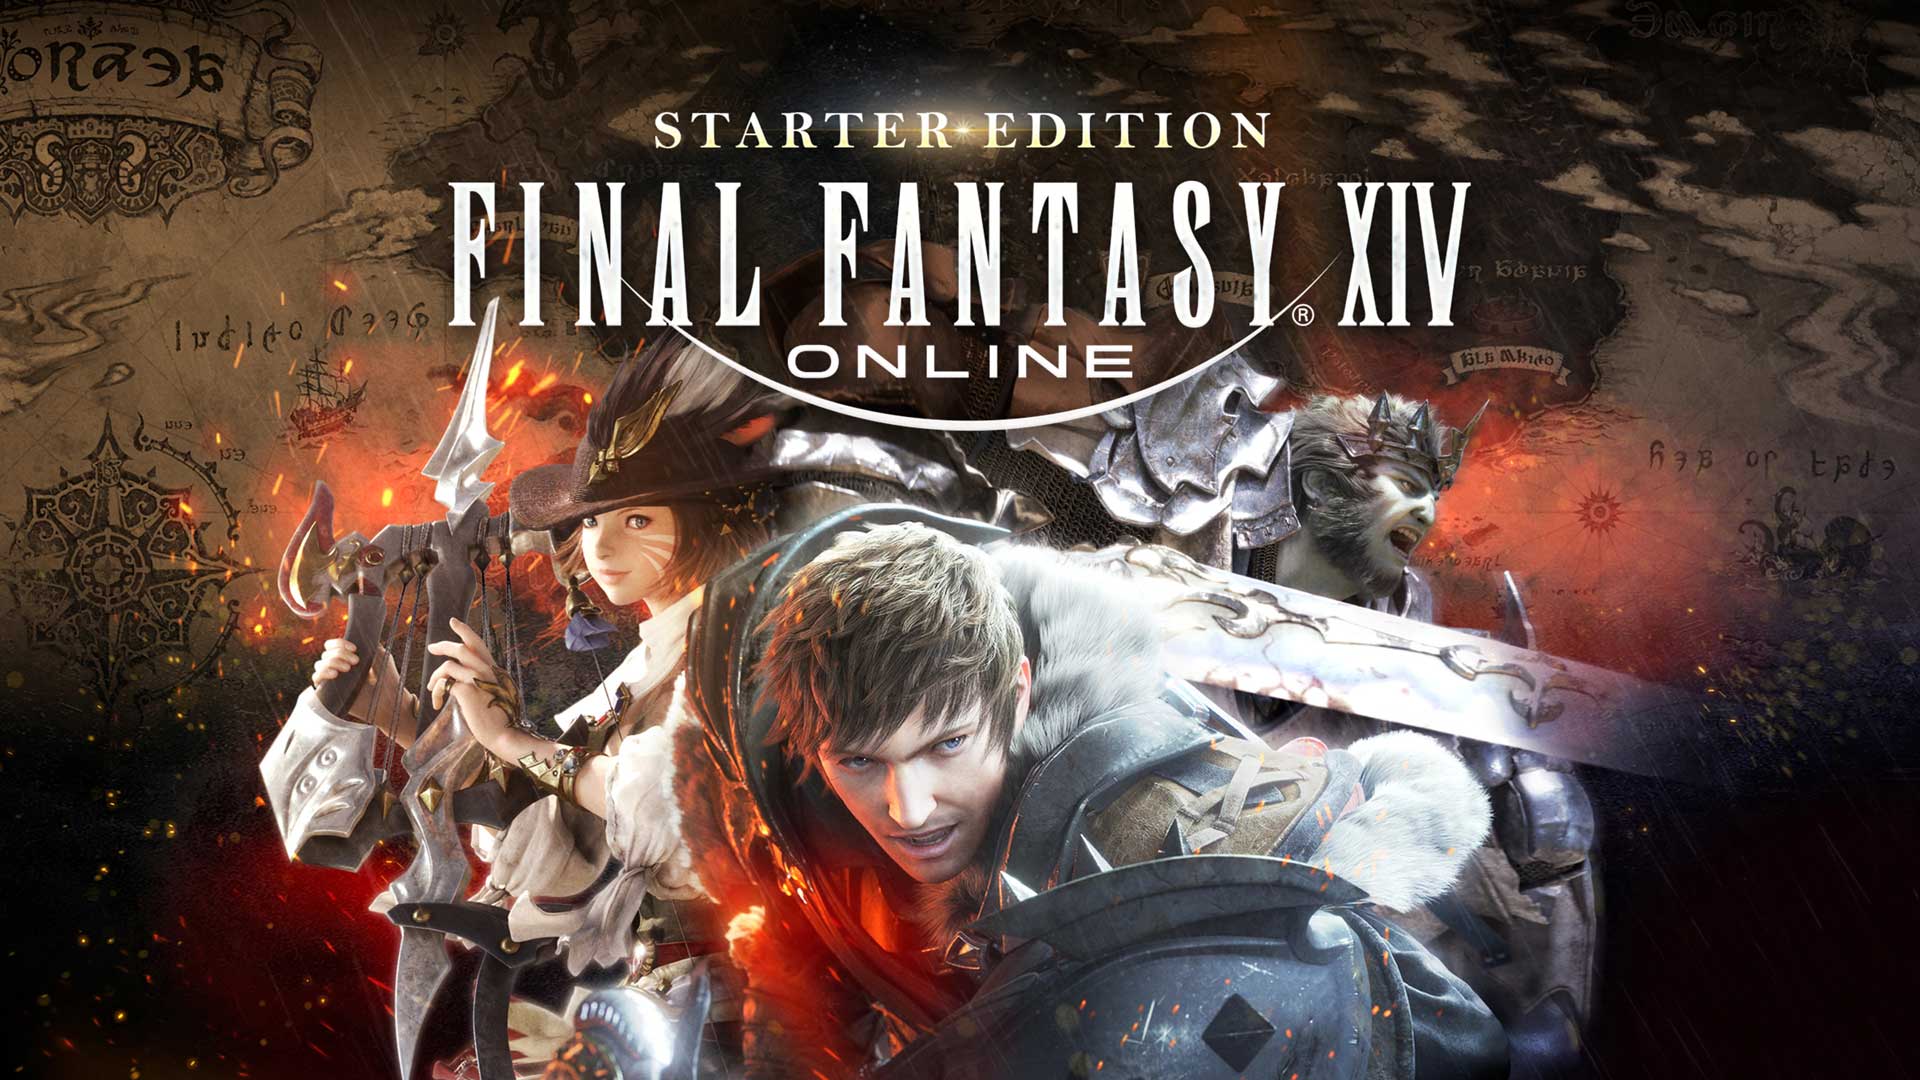 Final Fantasy XIV Online has a new starter guide video series